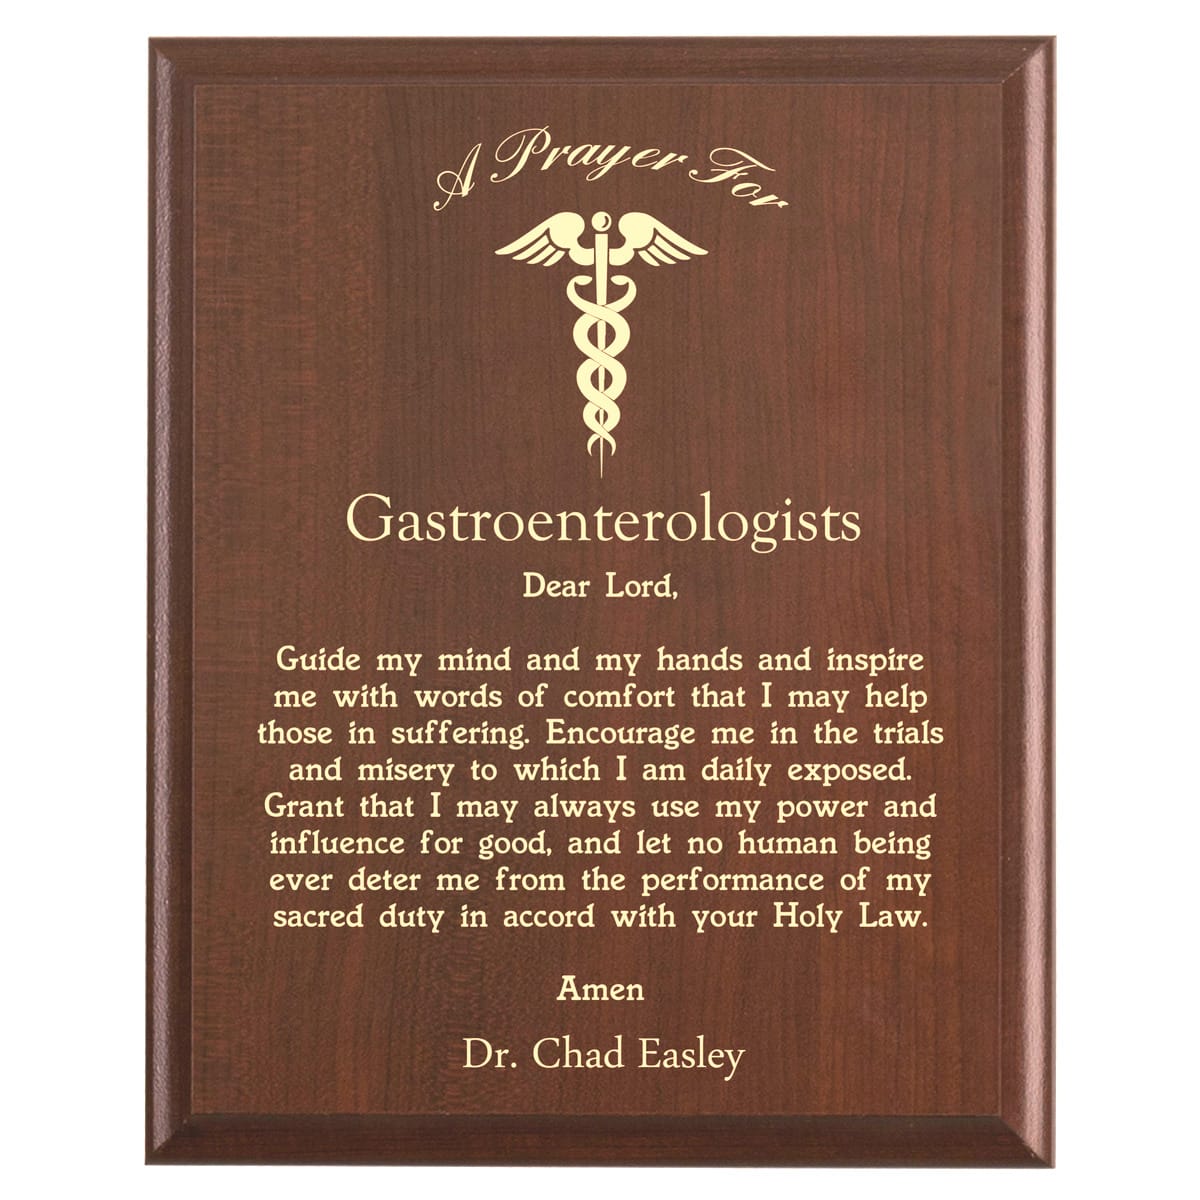 Plaque photo: Gastroenterologist Prayer Plaque design with free personalization. Wood style finish with customized text.